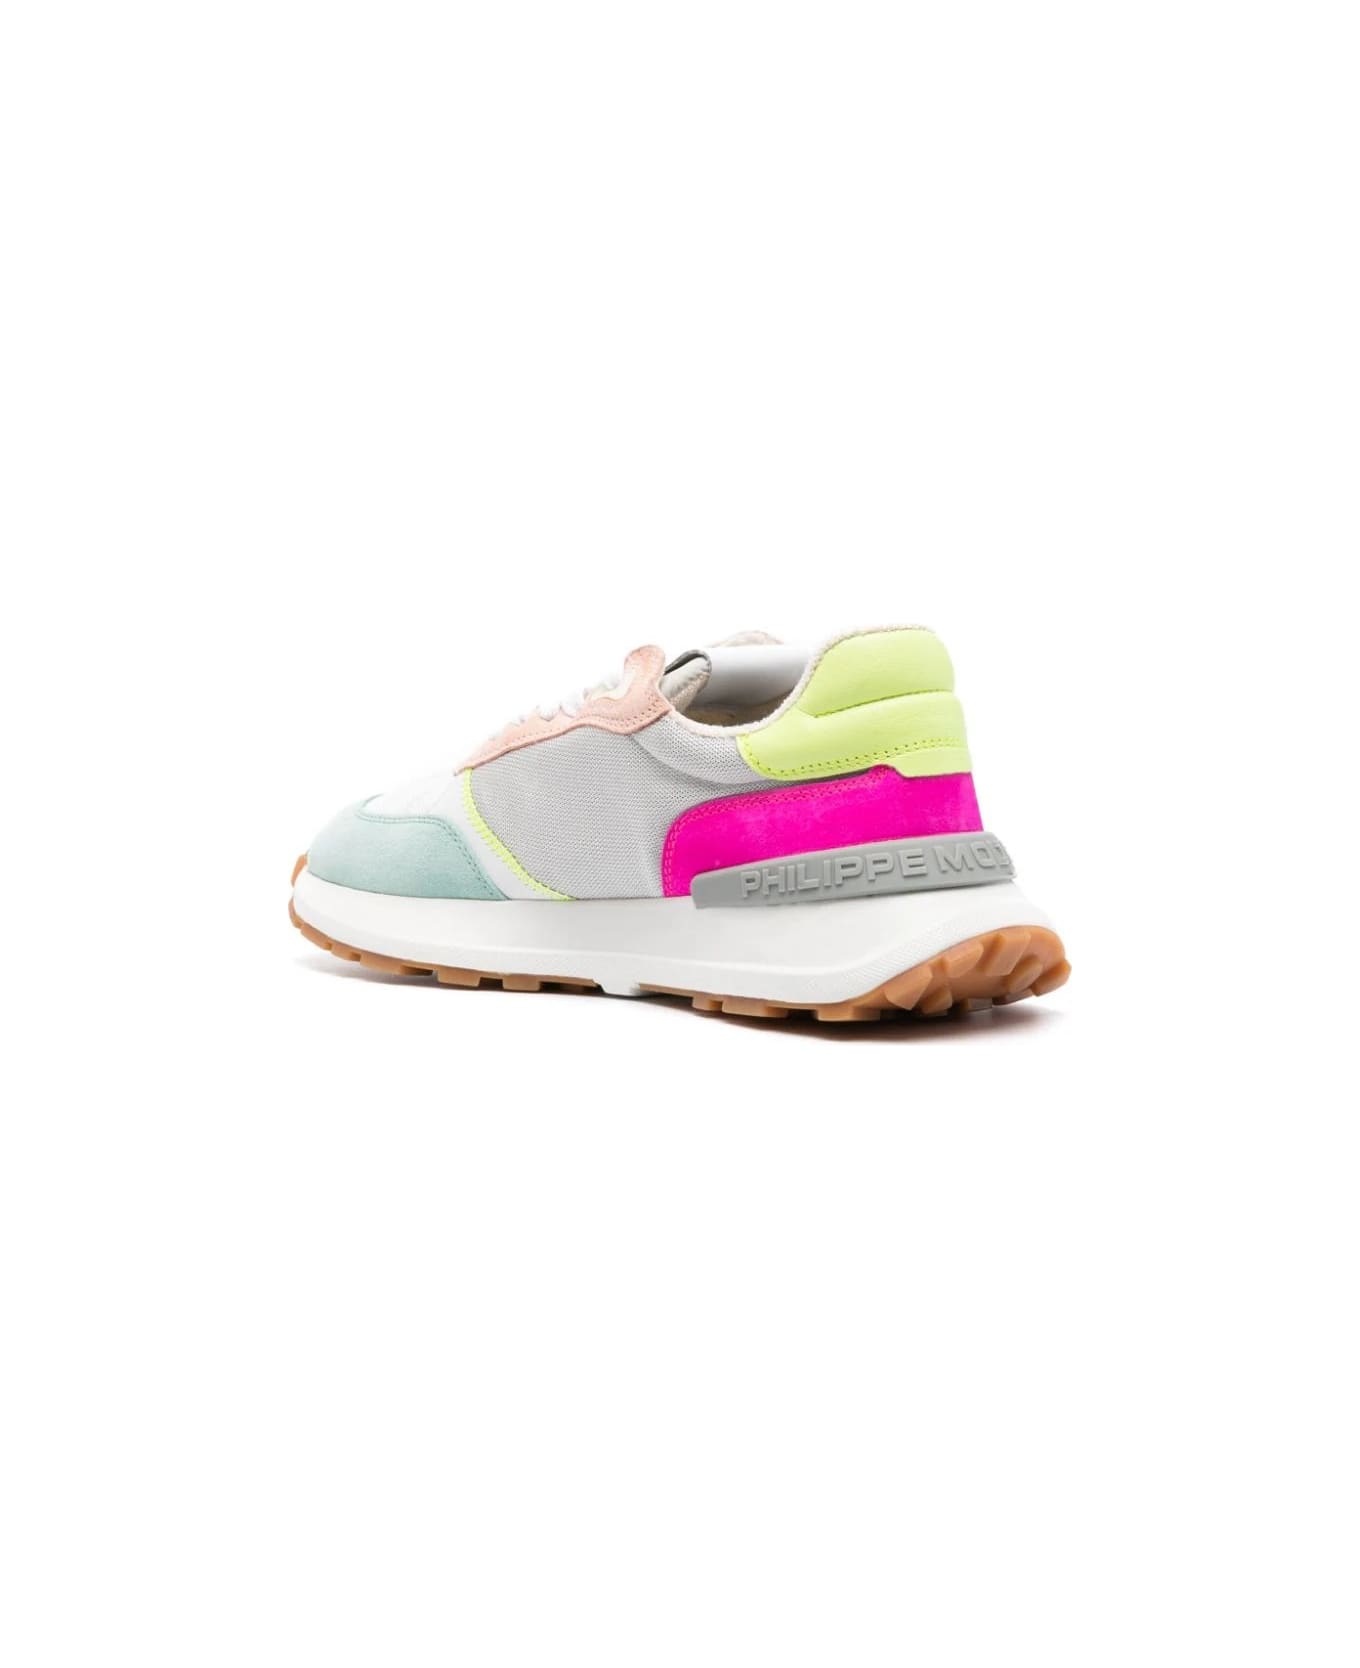 Philippe Model Running Antibes Sneakers - Silver And Fluo - Multicolour スニーカー